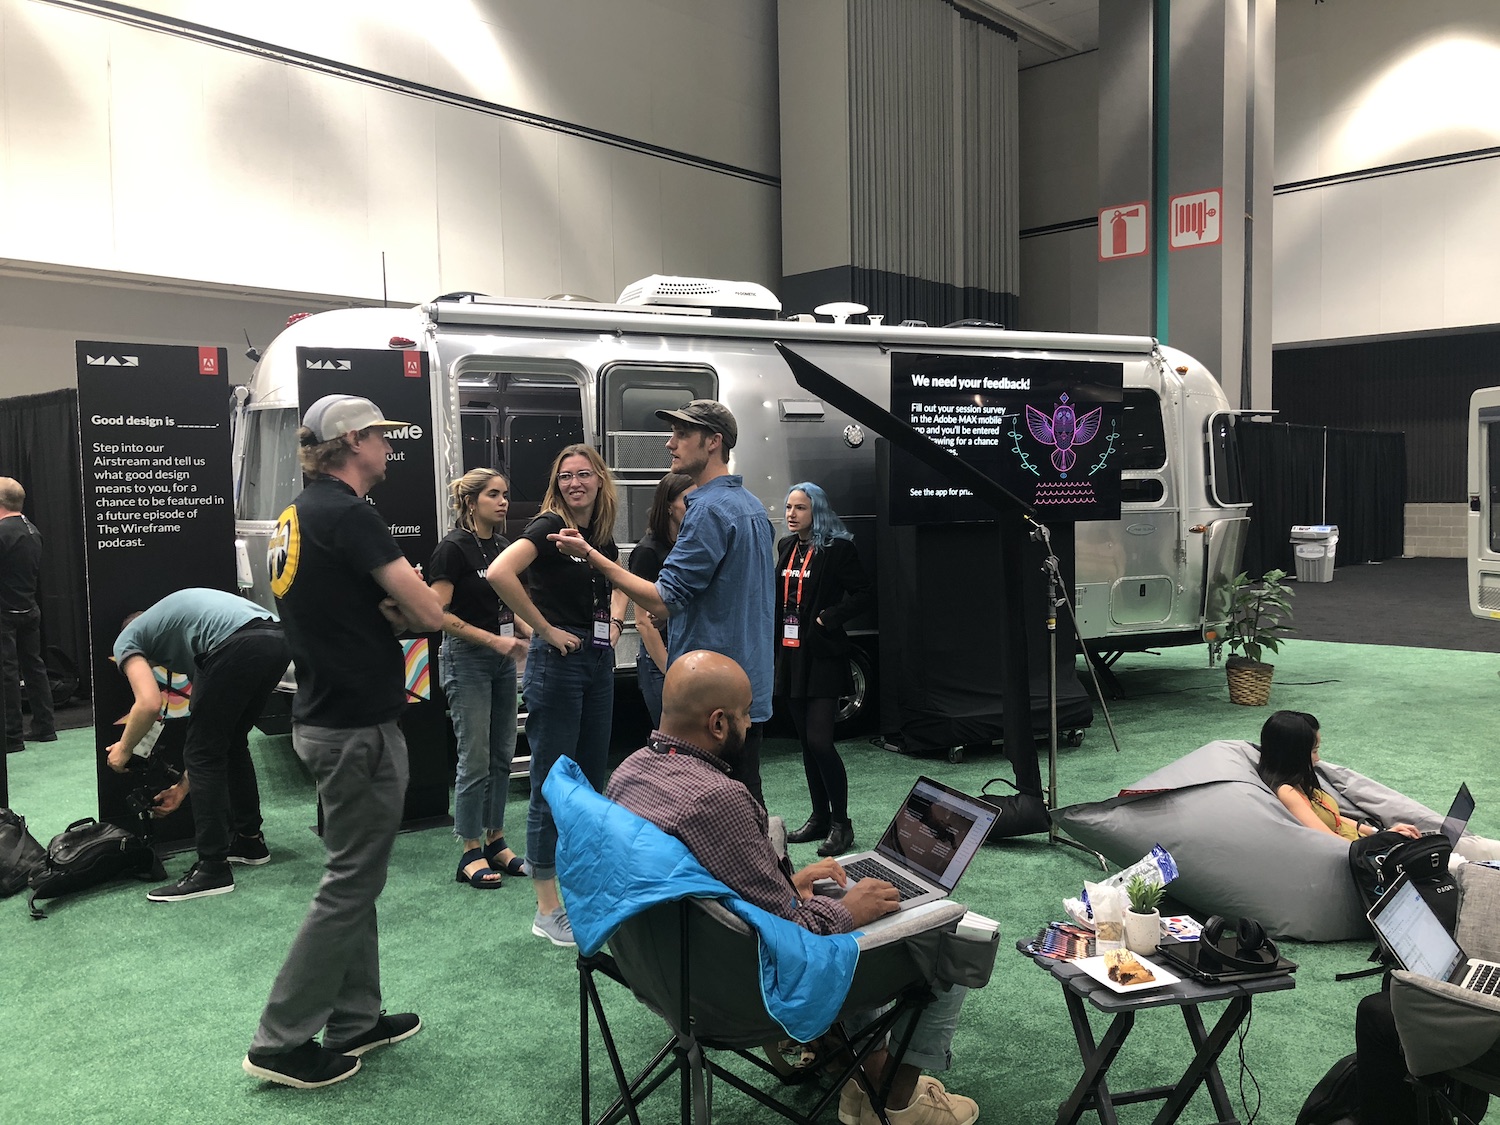 Wireframe’s Airstream Trailer at Adobe MAX 2018